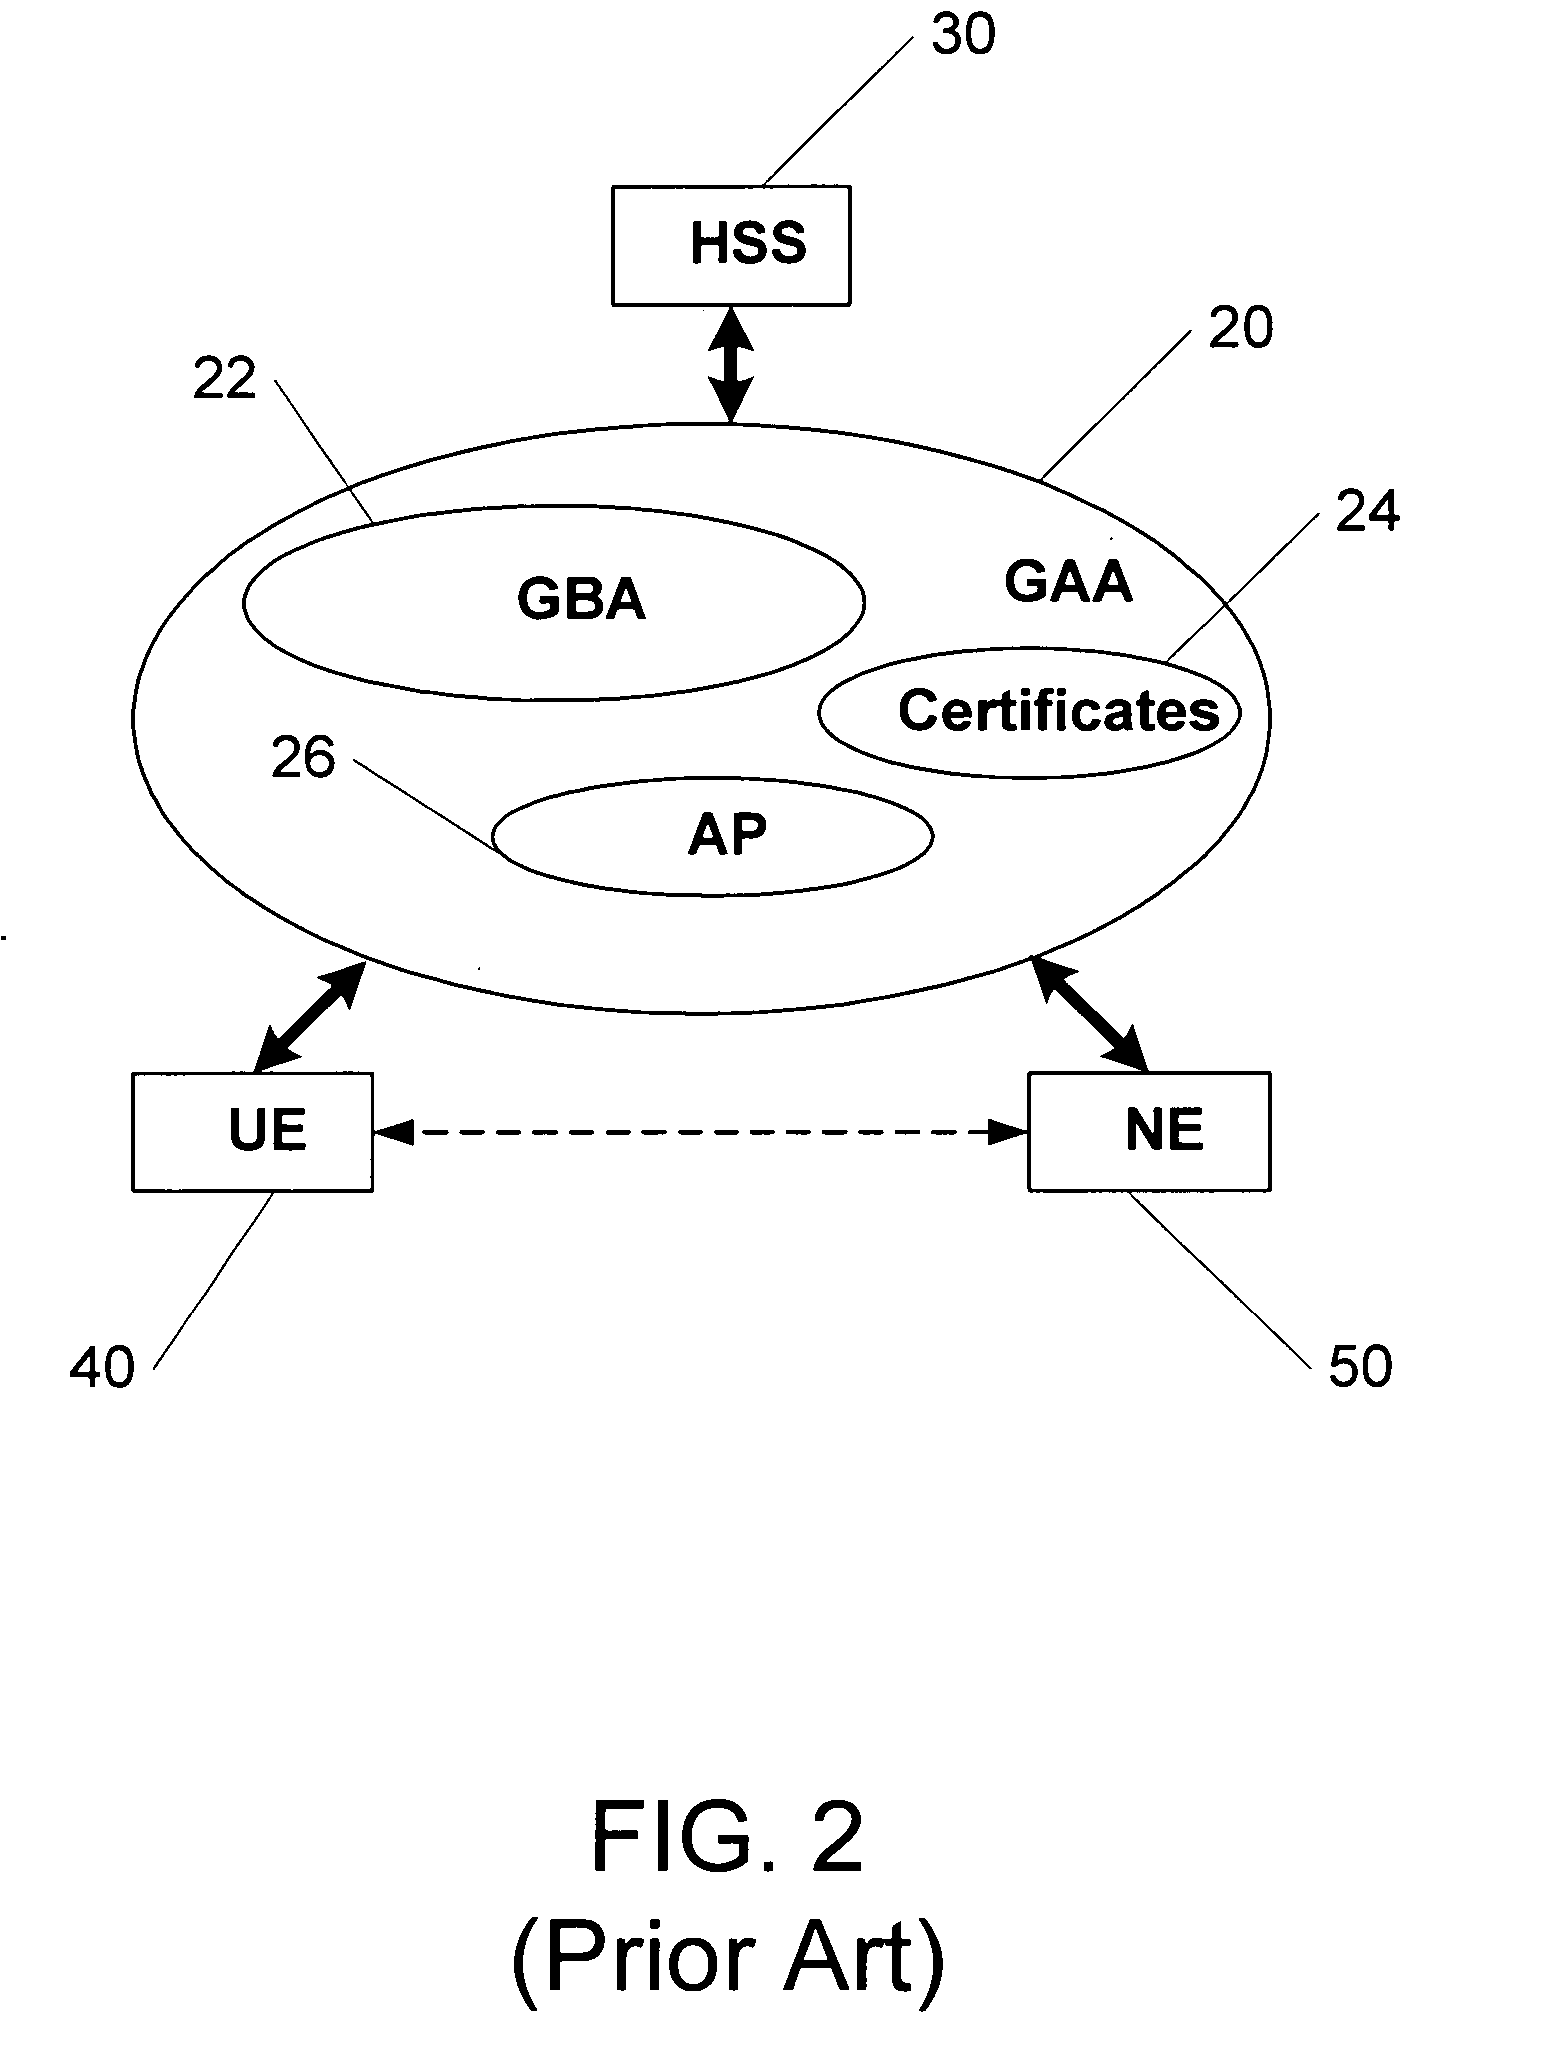 Methods, system and mobile device capable of enabling credit card personalization using a wireless network